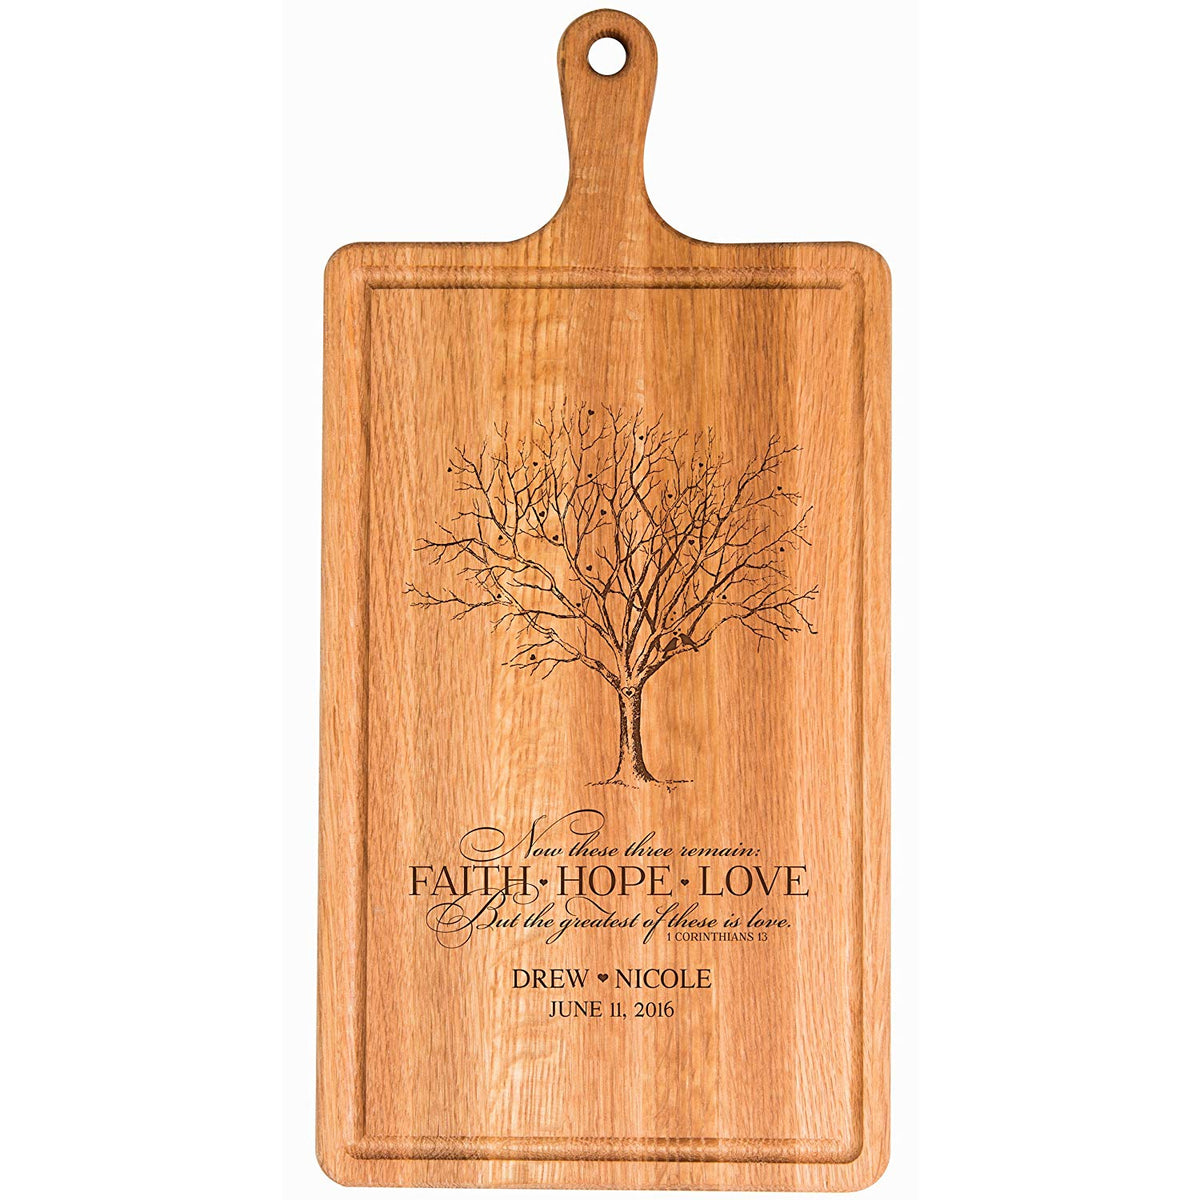 Personalized Family Wedding Cutting Board Gift - FAITH HOPE LOVE - LifeSong Milestones